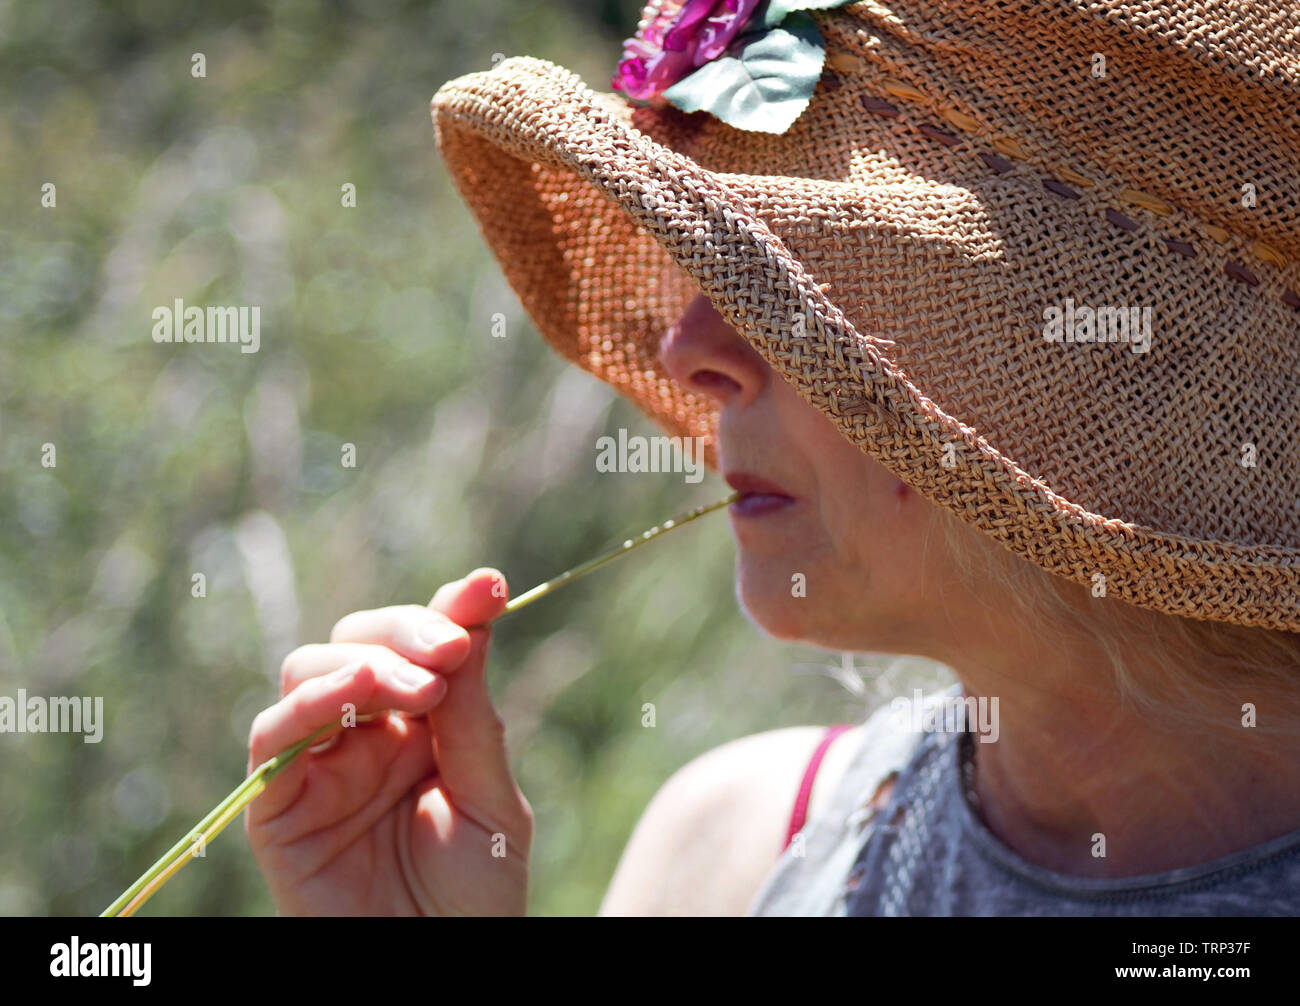 A woman wearing a summer hat chews on a stem of grass. Stock Photo